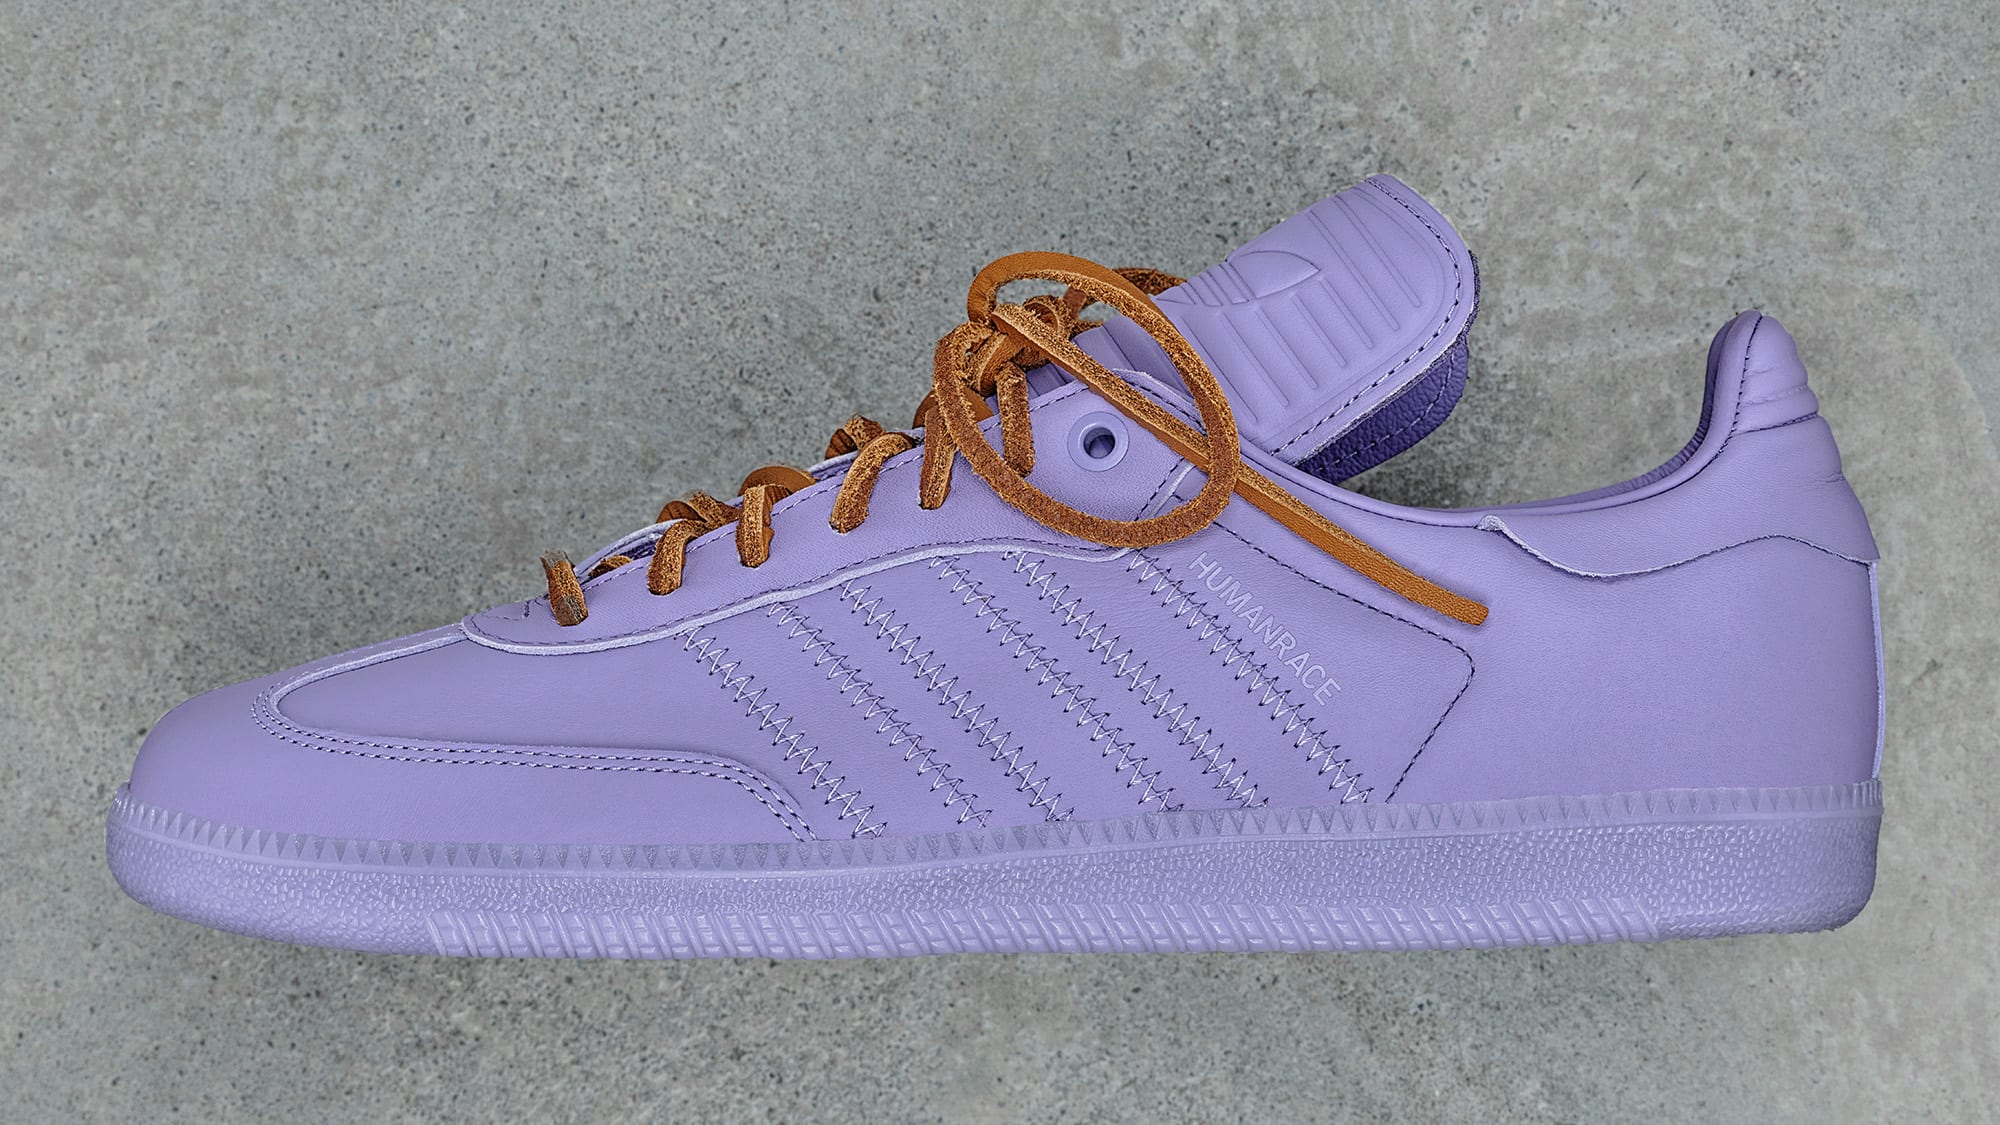 When will Pharrell Williams x Adidas Humanrace Samba Colors Pack drop?  Release date, order information, and more details explored